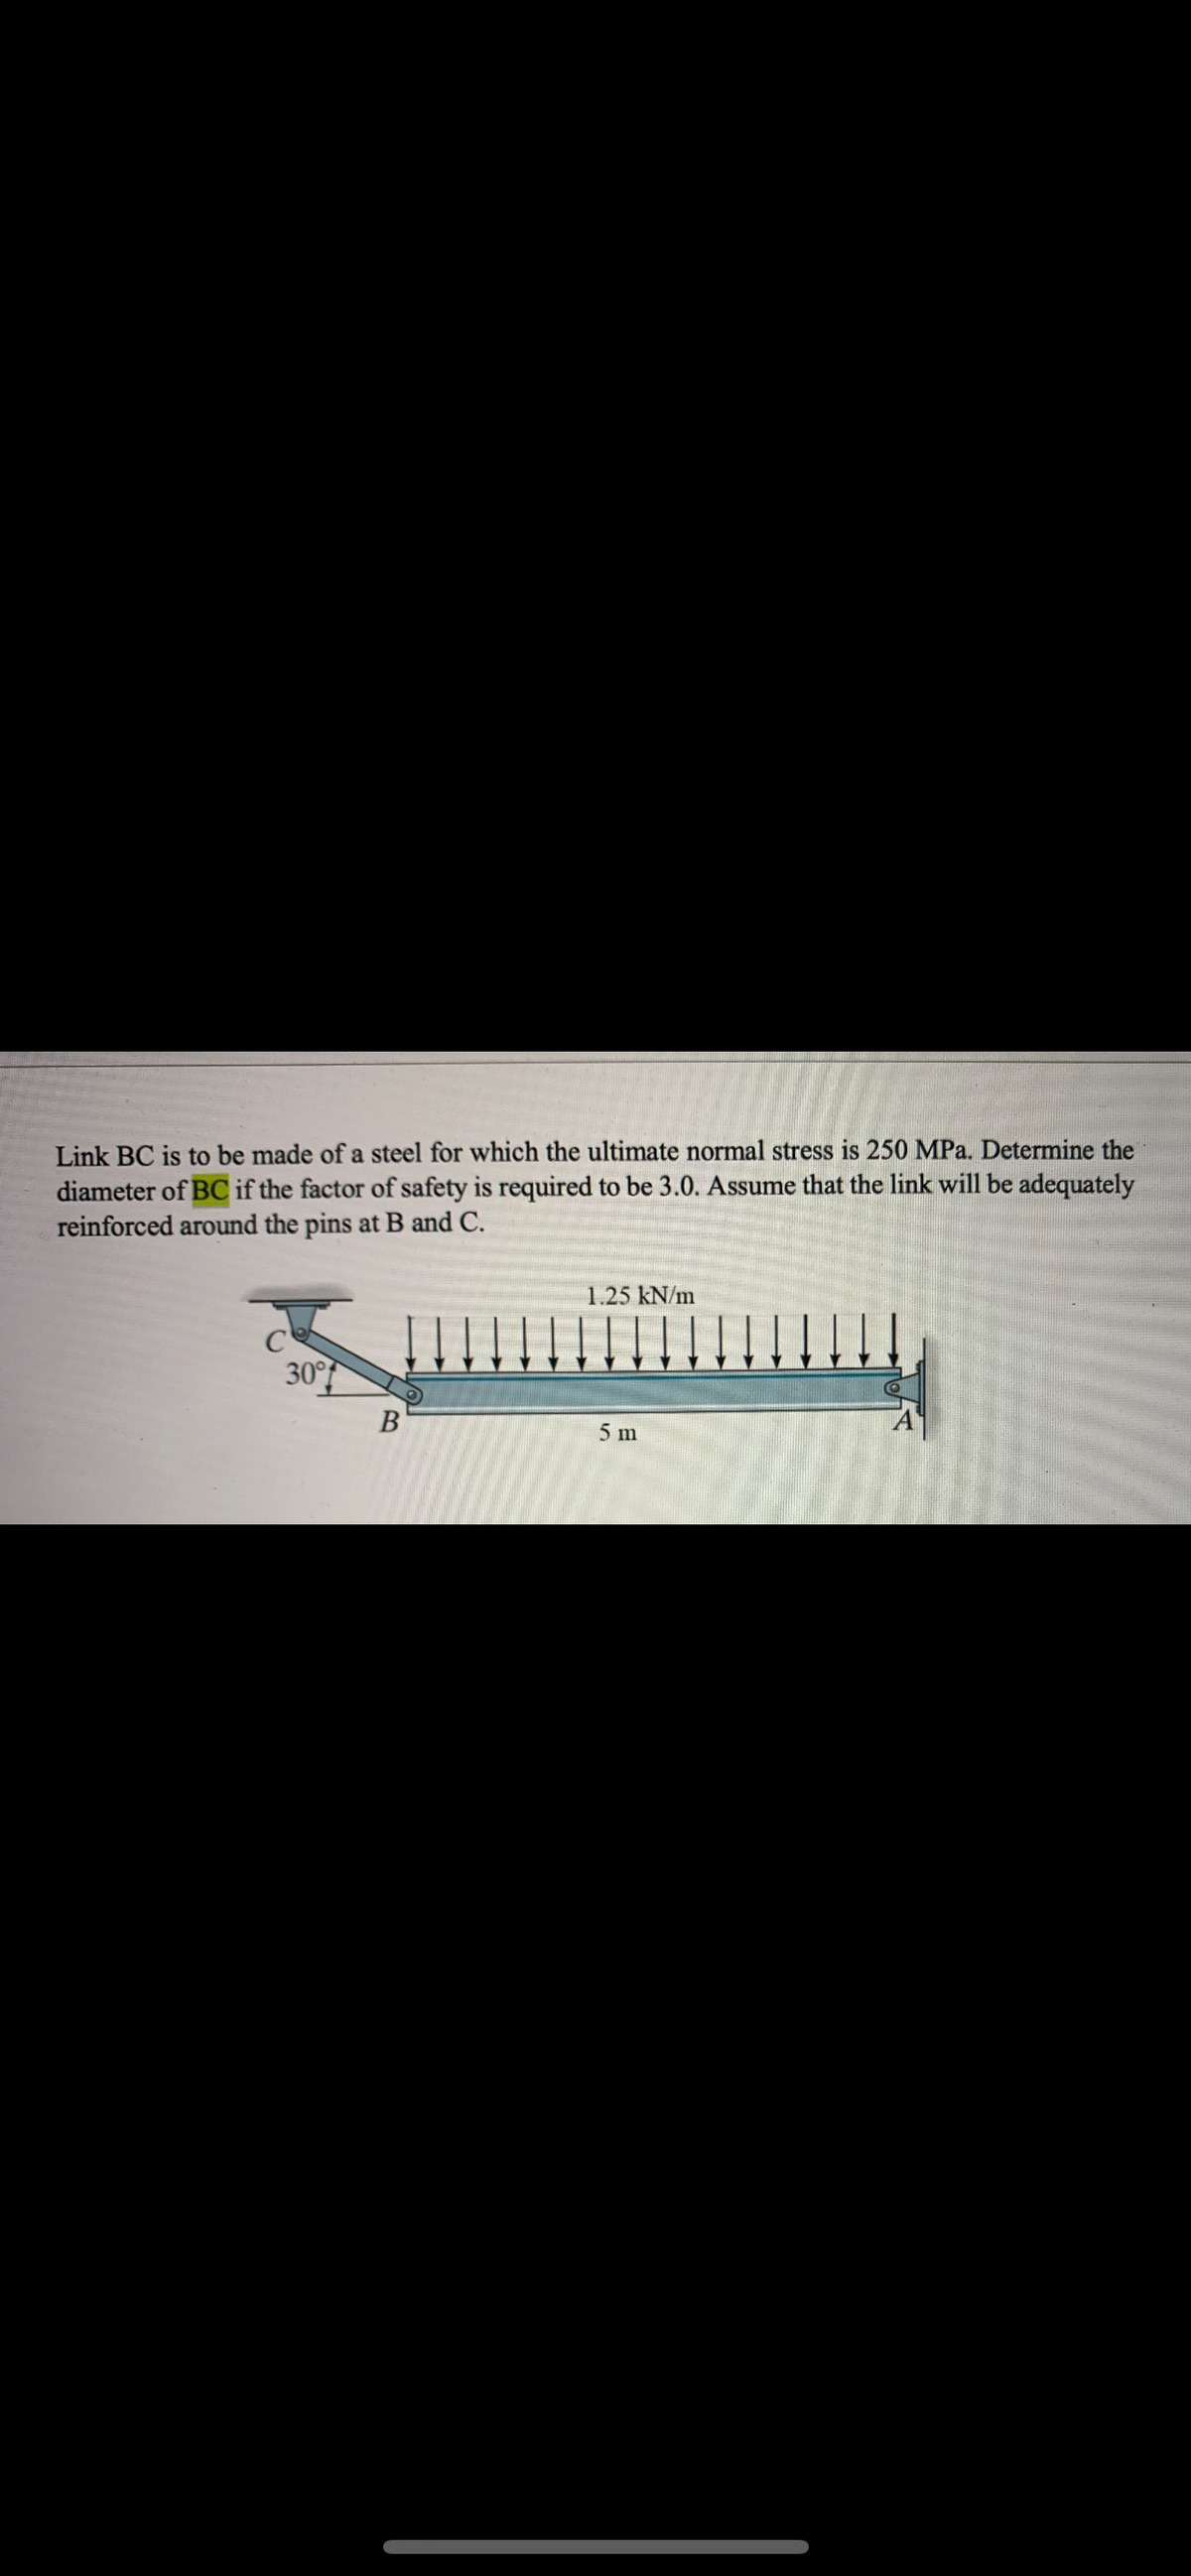 Link BC is to be made of a steel for which the ultimate normal stress is 250 MPa. Determine the
diameter of BC if the factor of safety is required to be 3.0. Assume that the link will be adequately
reinforced around the pins at B and C.
1.25 kN/m
30°
5 m
